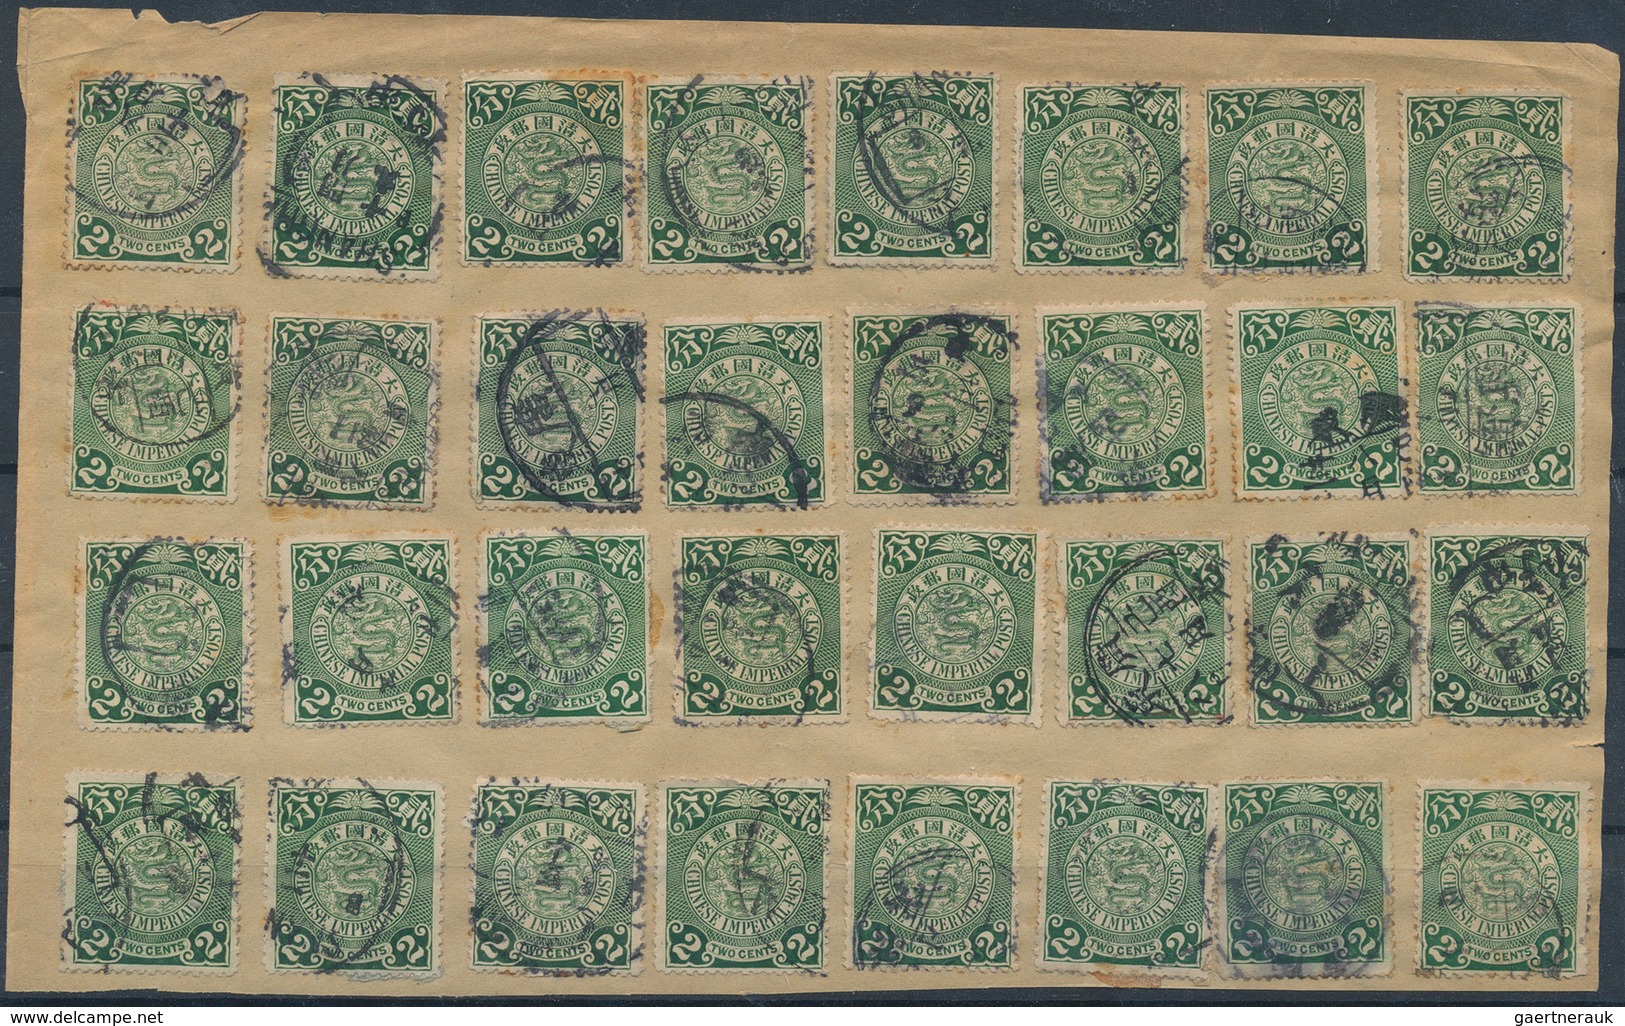 China: 1898/1909, coiling dragons used up to 10 C., mostly 2 C. carmine or 2 C. green, 300+ copies o